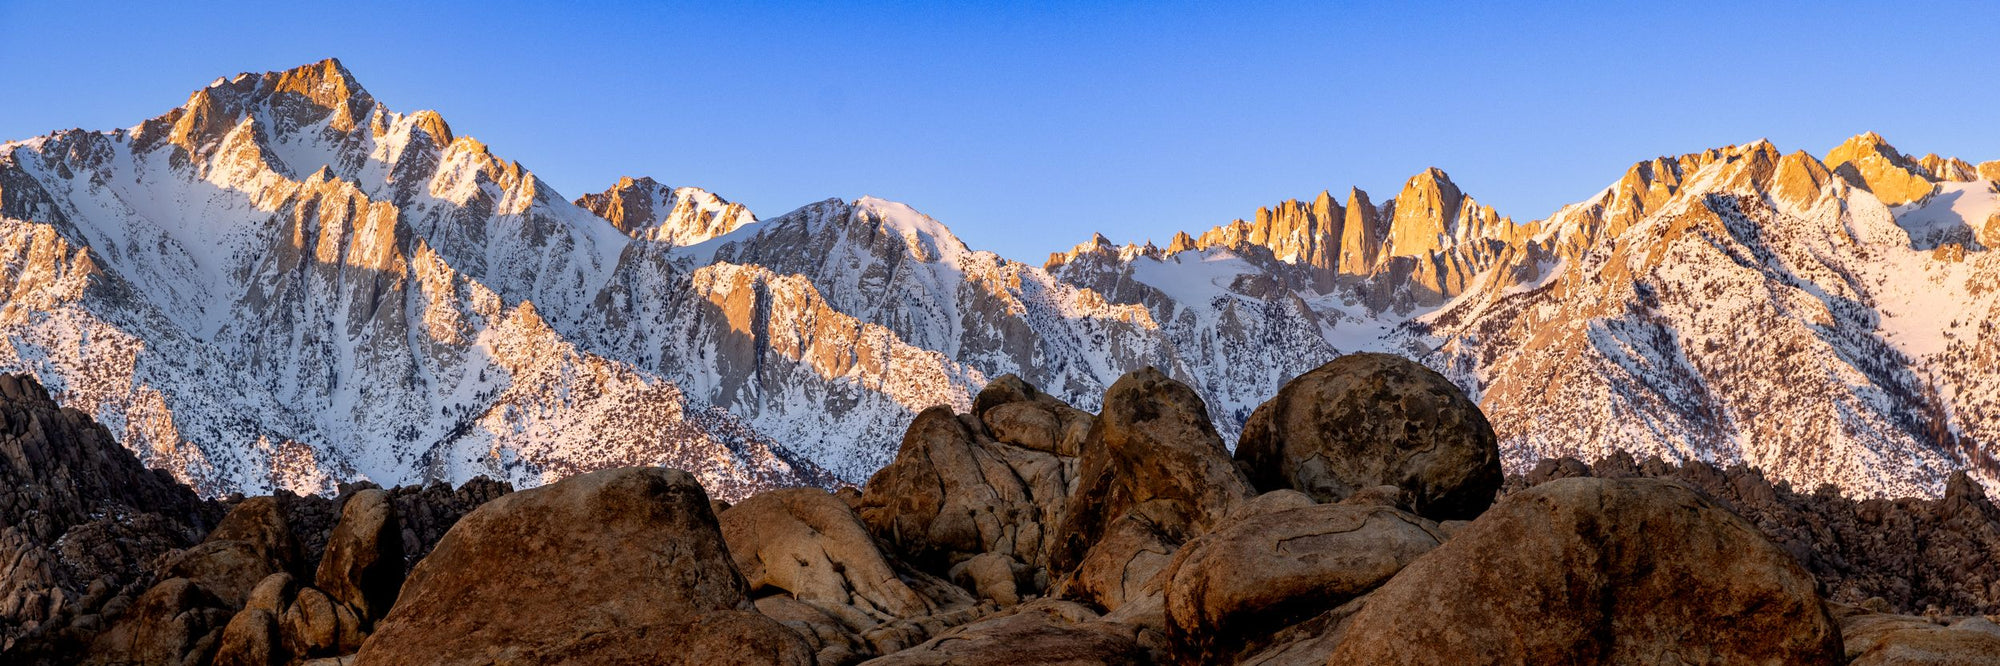 The sun sends golden highlights across the peaks of the Alabama Hills.